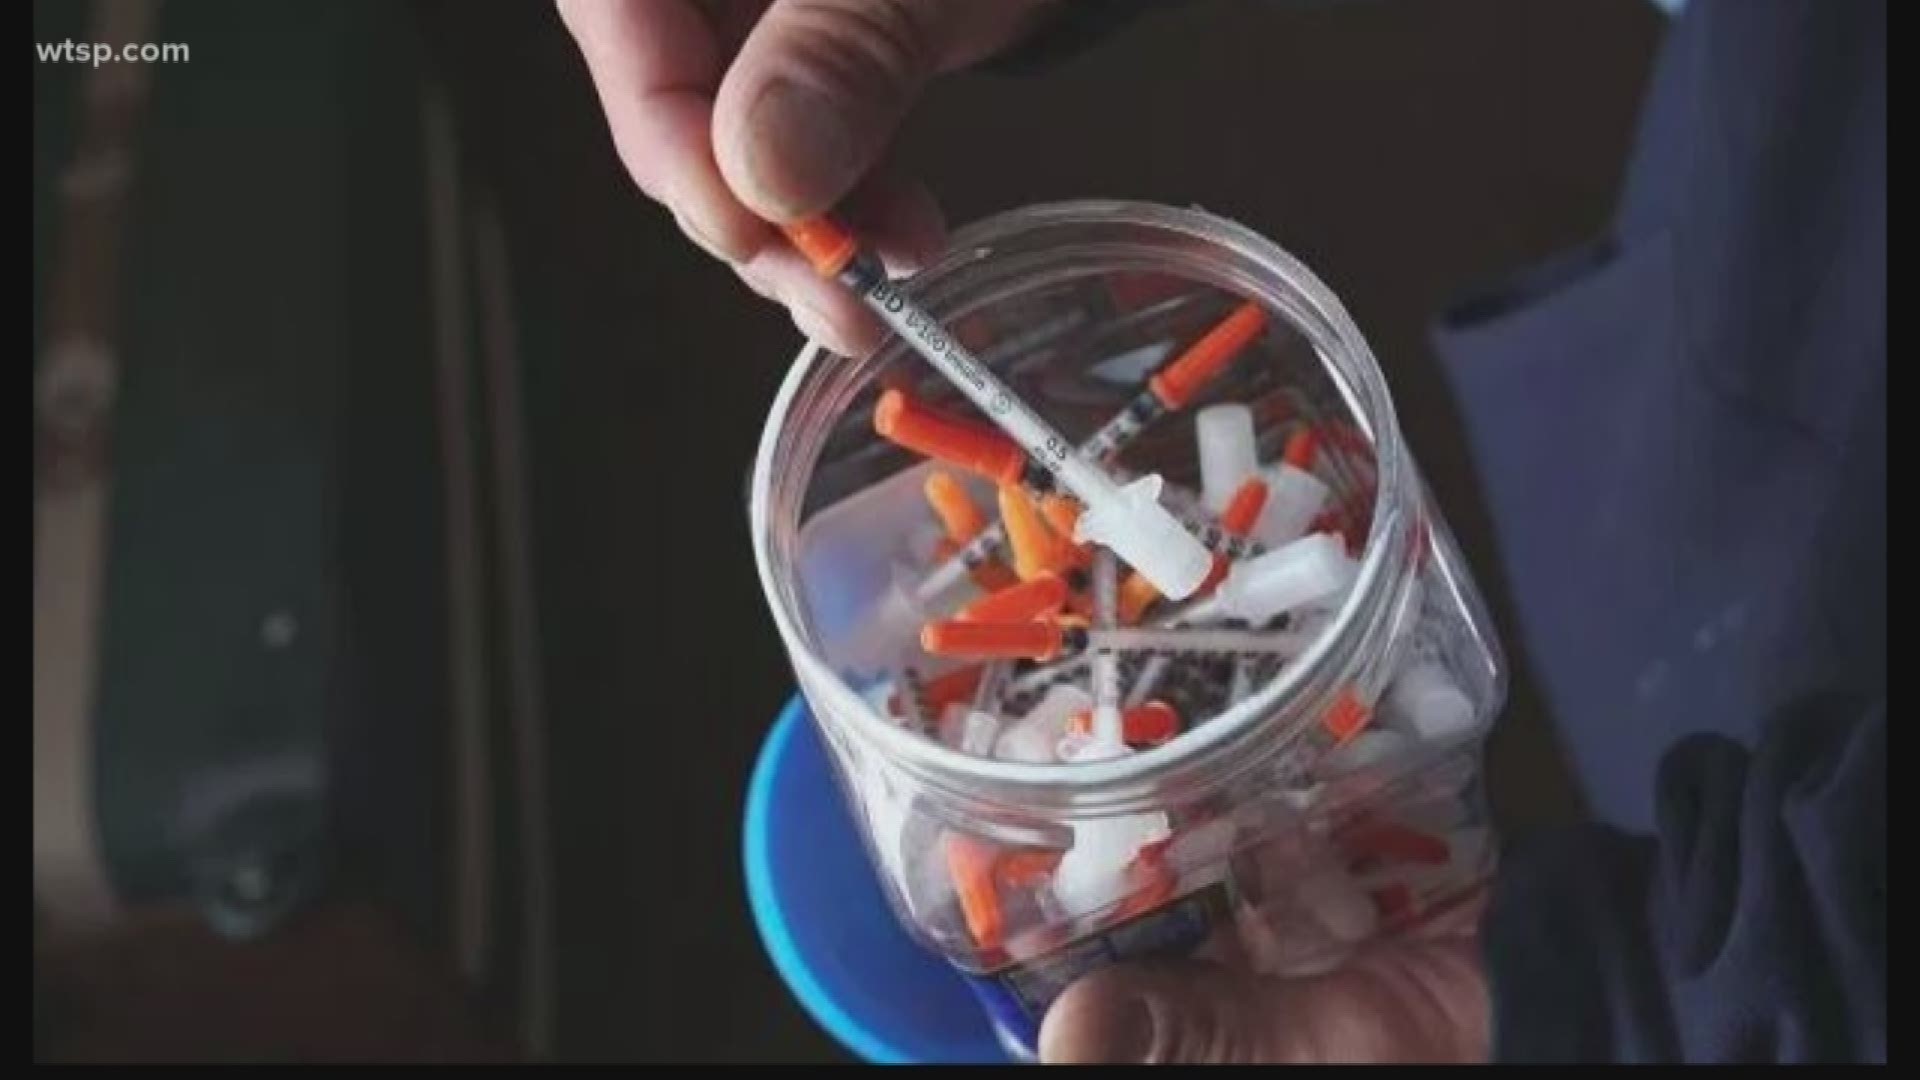 On July 1, a new law will clear the way for needle exchange programs in Florida, allowing counties to offer clean syringes in exchange for used needles -- at taxpayer expense.

At first, that might seem like a questionable way to spend your money.

But a needle exchange pilot program in the Miami-Dade area was so effective, even the state’s conservative Legislature and governor have given it the green light.